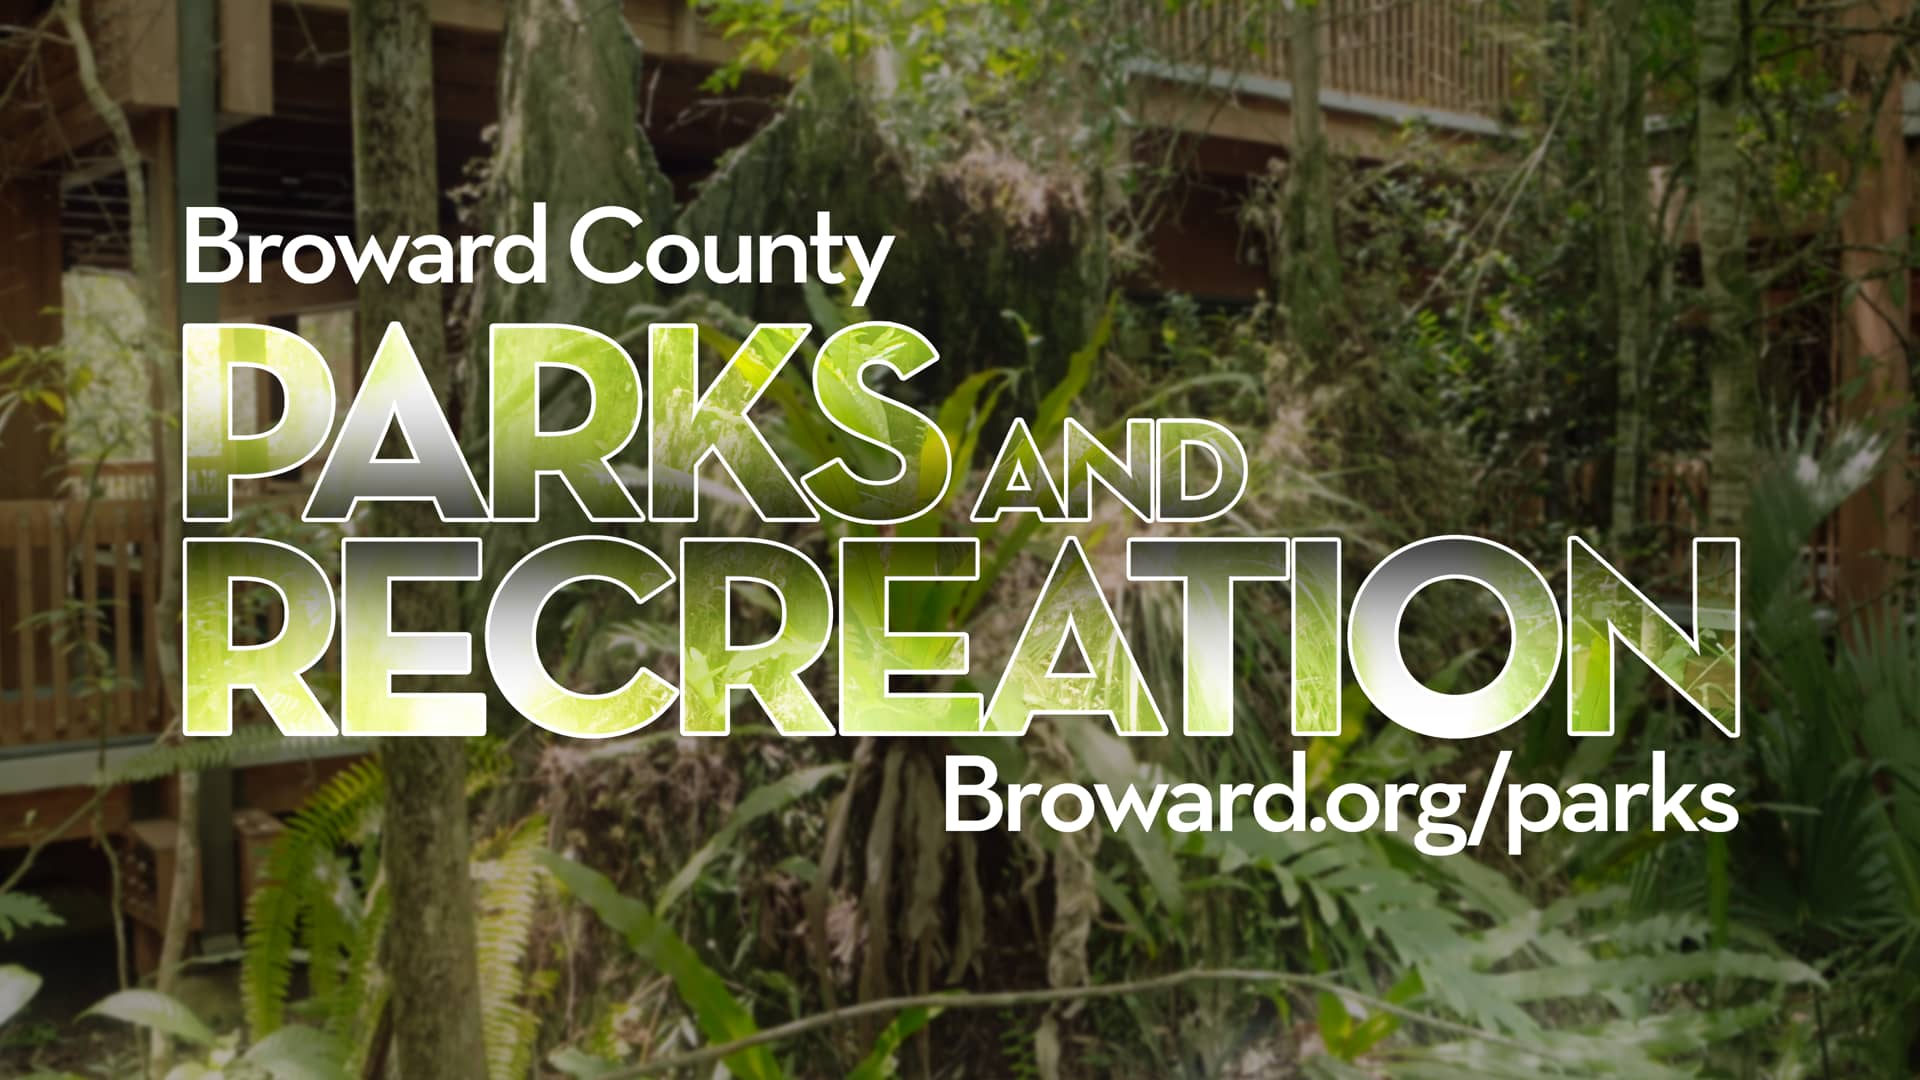 Broward County Parks and Recreation on Vimeo